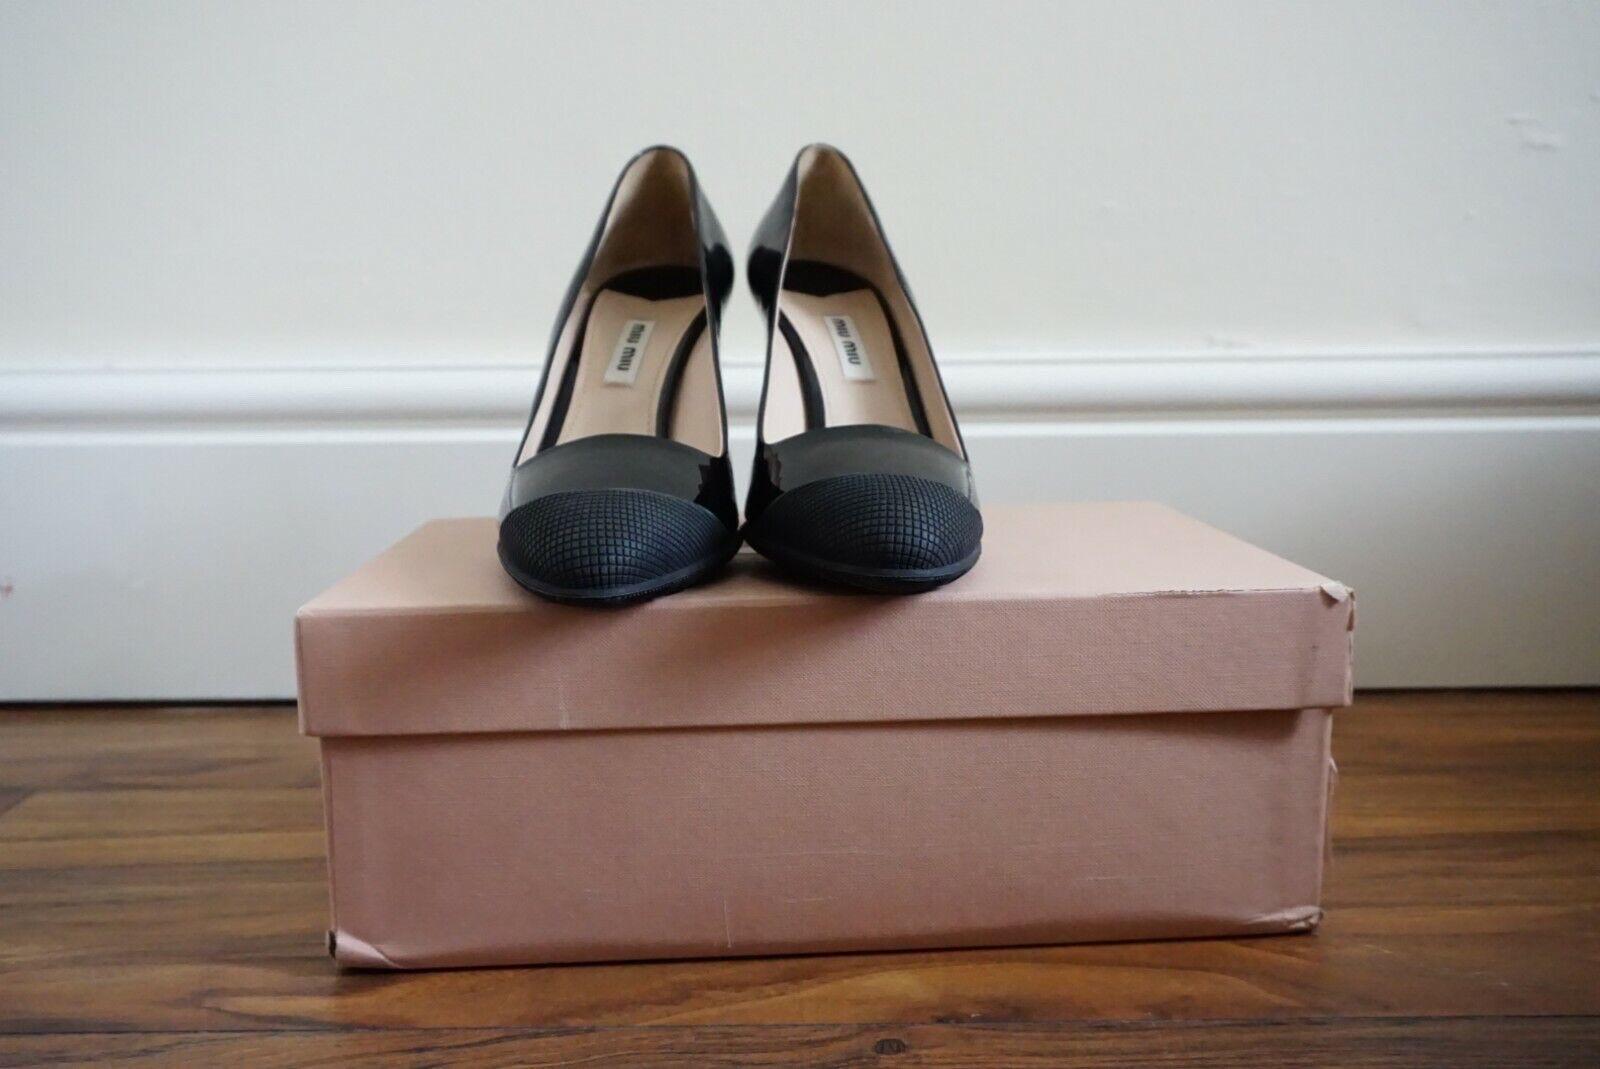 Women's Miu Miu Vernice Patent Leather Pointed Heels Rubber Grip Soles Black 37.5 BNWT For Sale